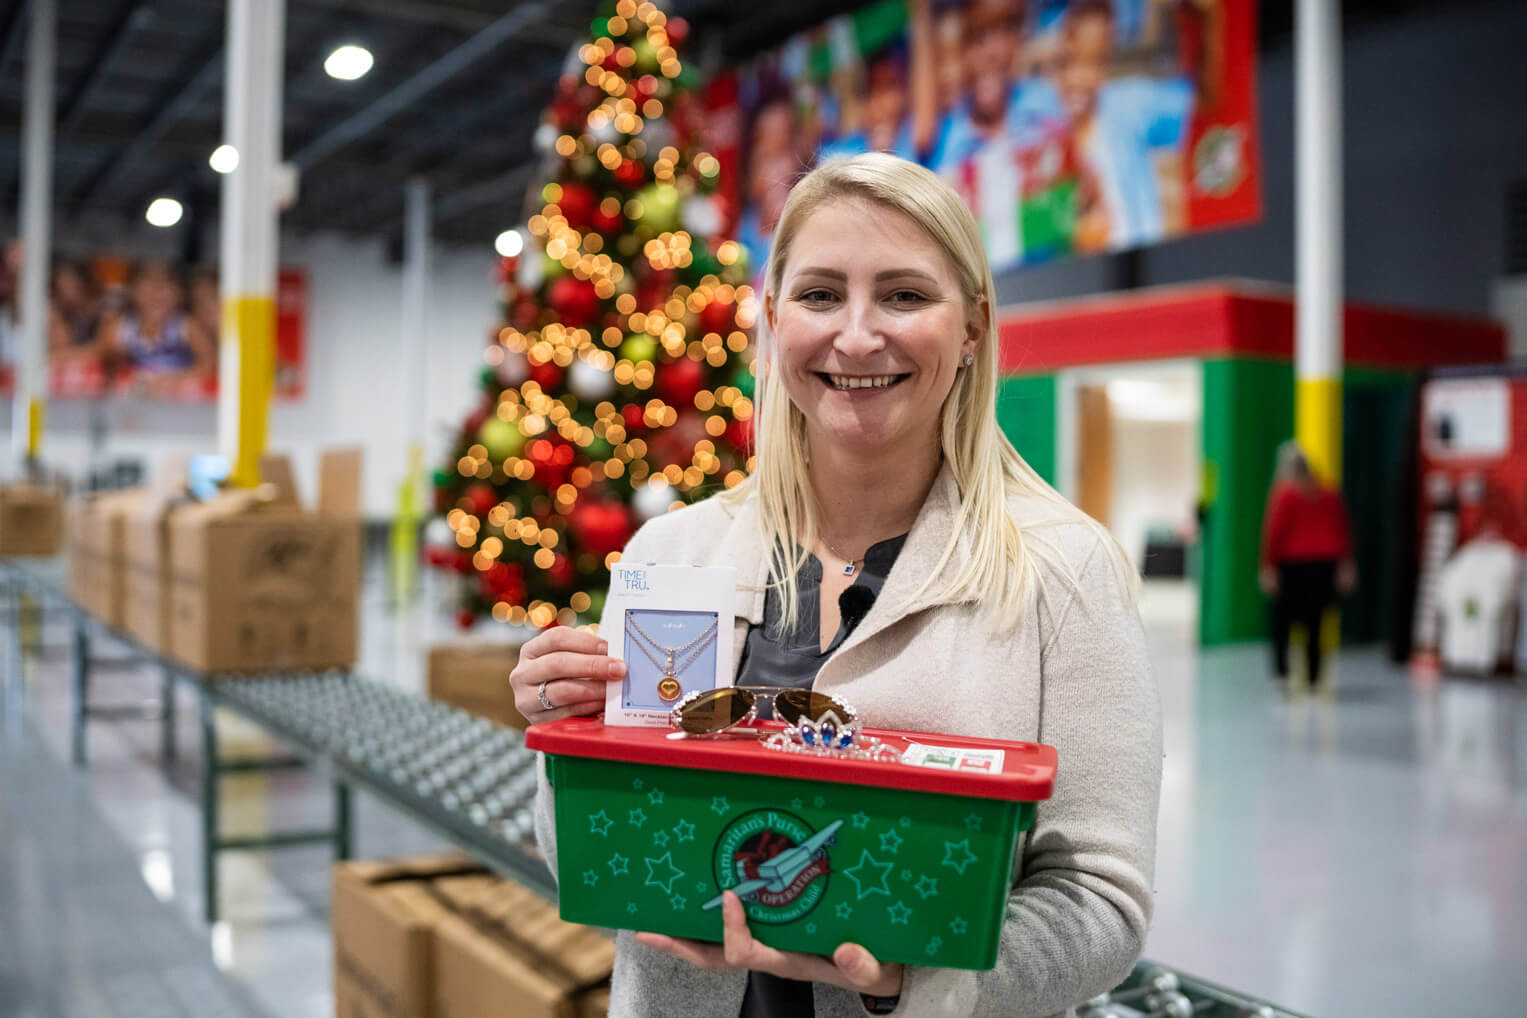 Elizabeth is traveling to Operation Christmas Child processing centers and drop-off locations with the 200 millionth shoebox gift.